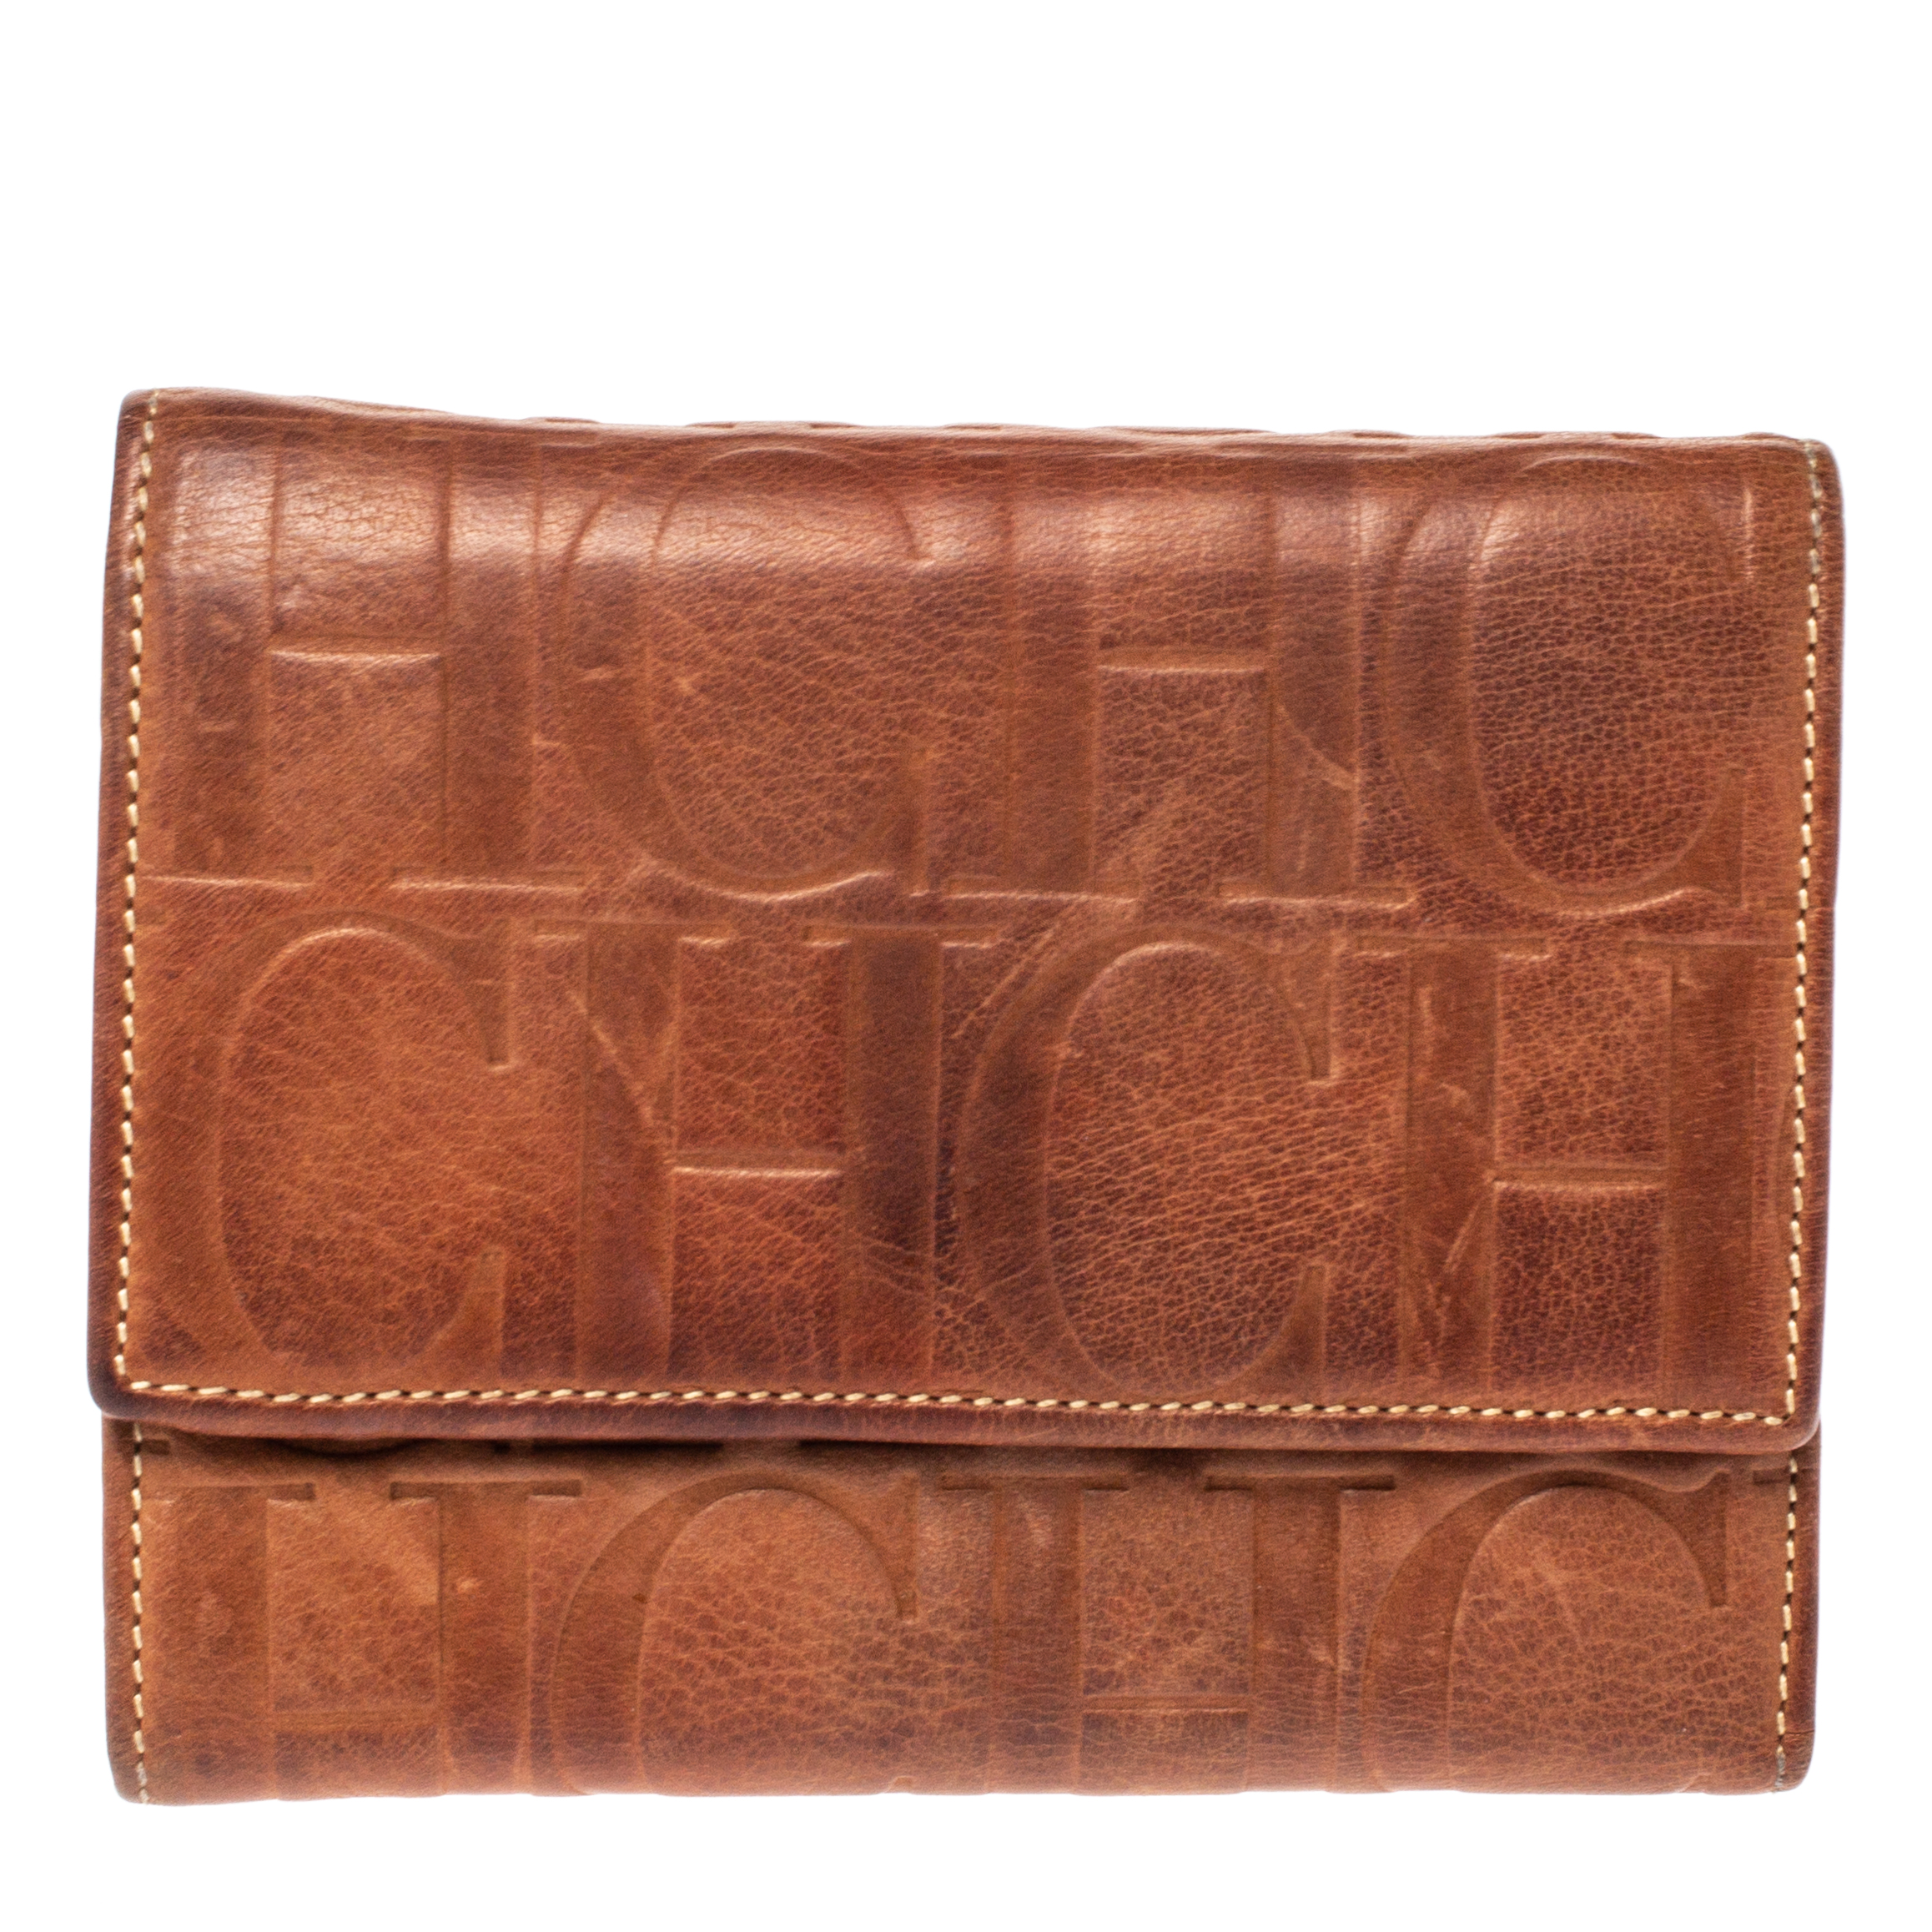 

Carolina Herrera Brown Embossed Leather Trifold Compact Wallet